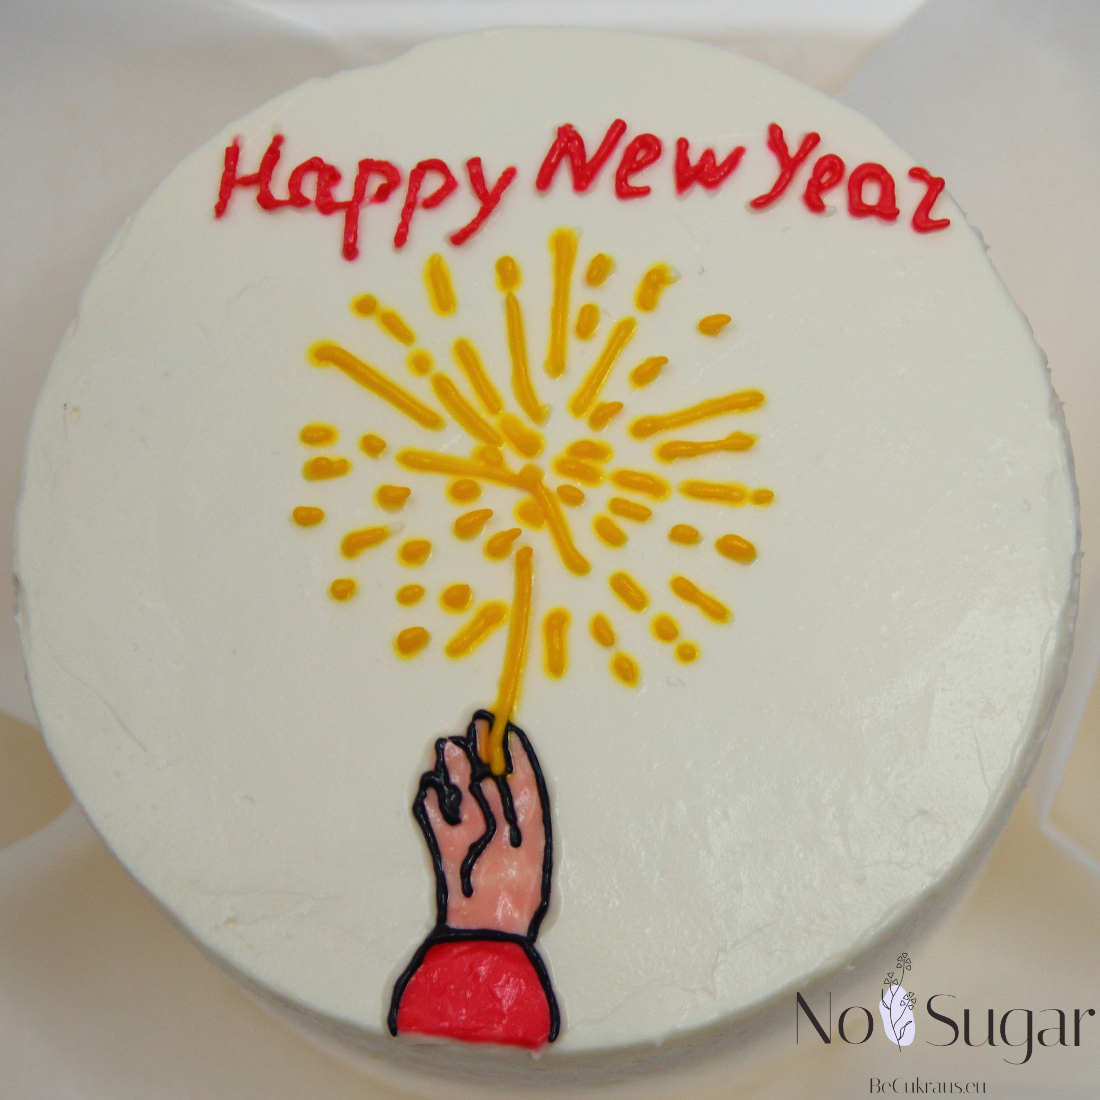 Sparklers on a New Year bento cake